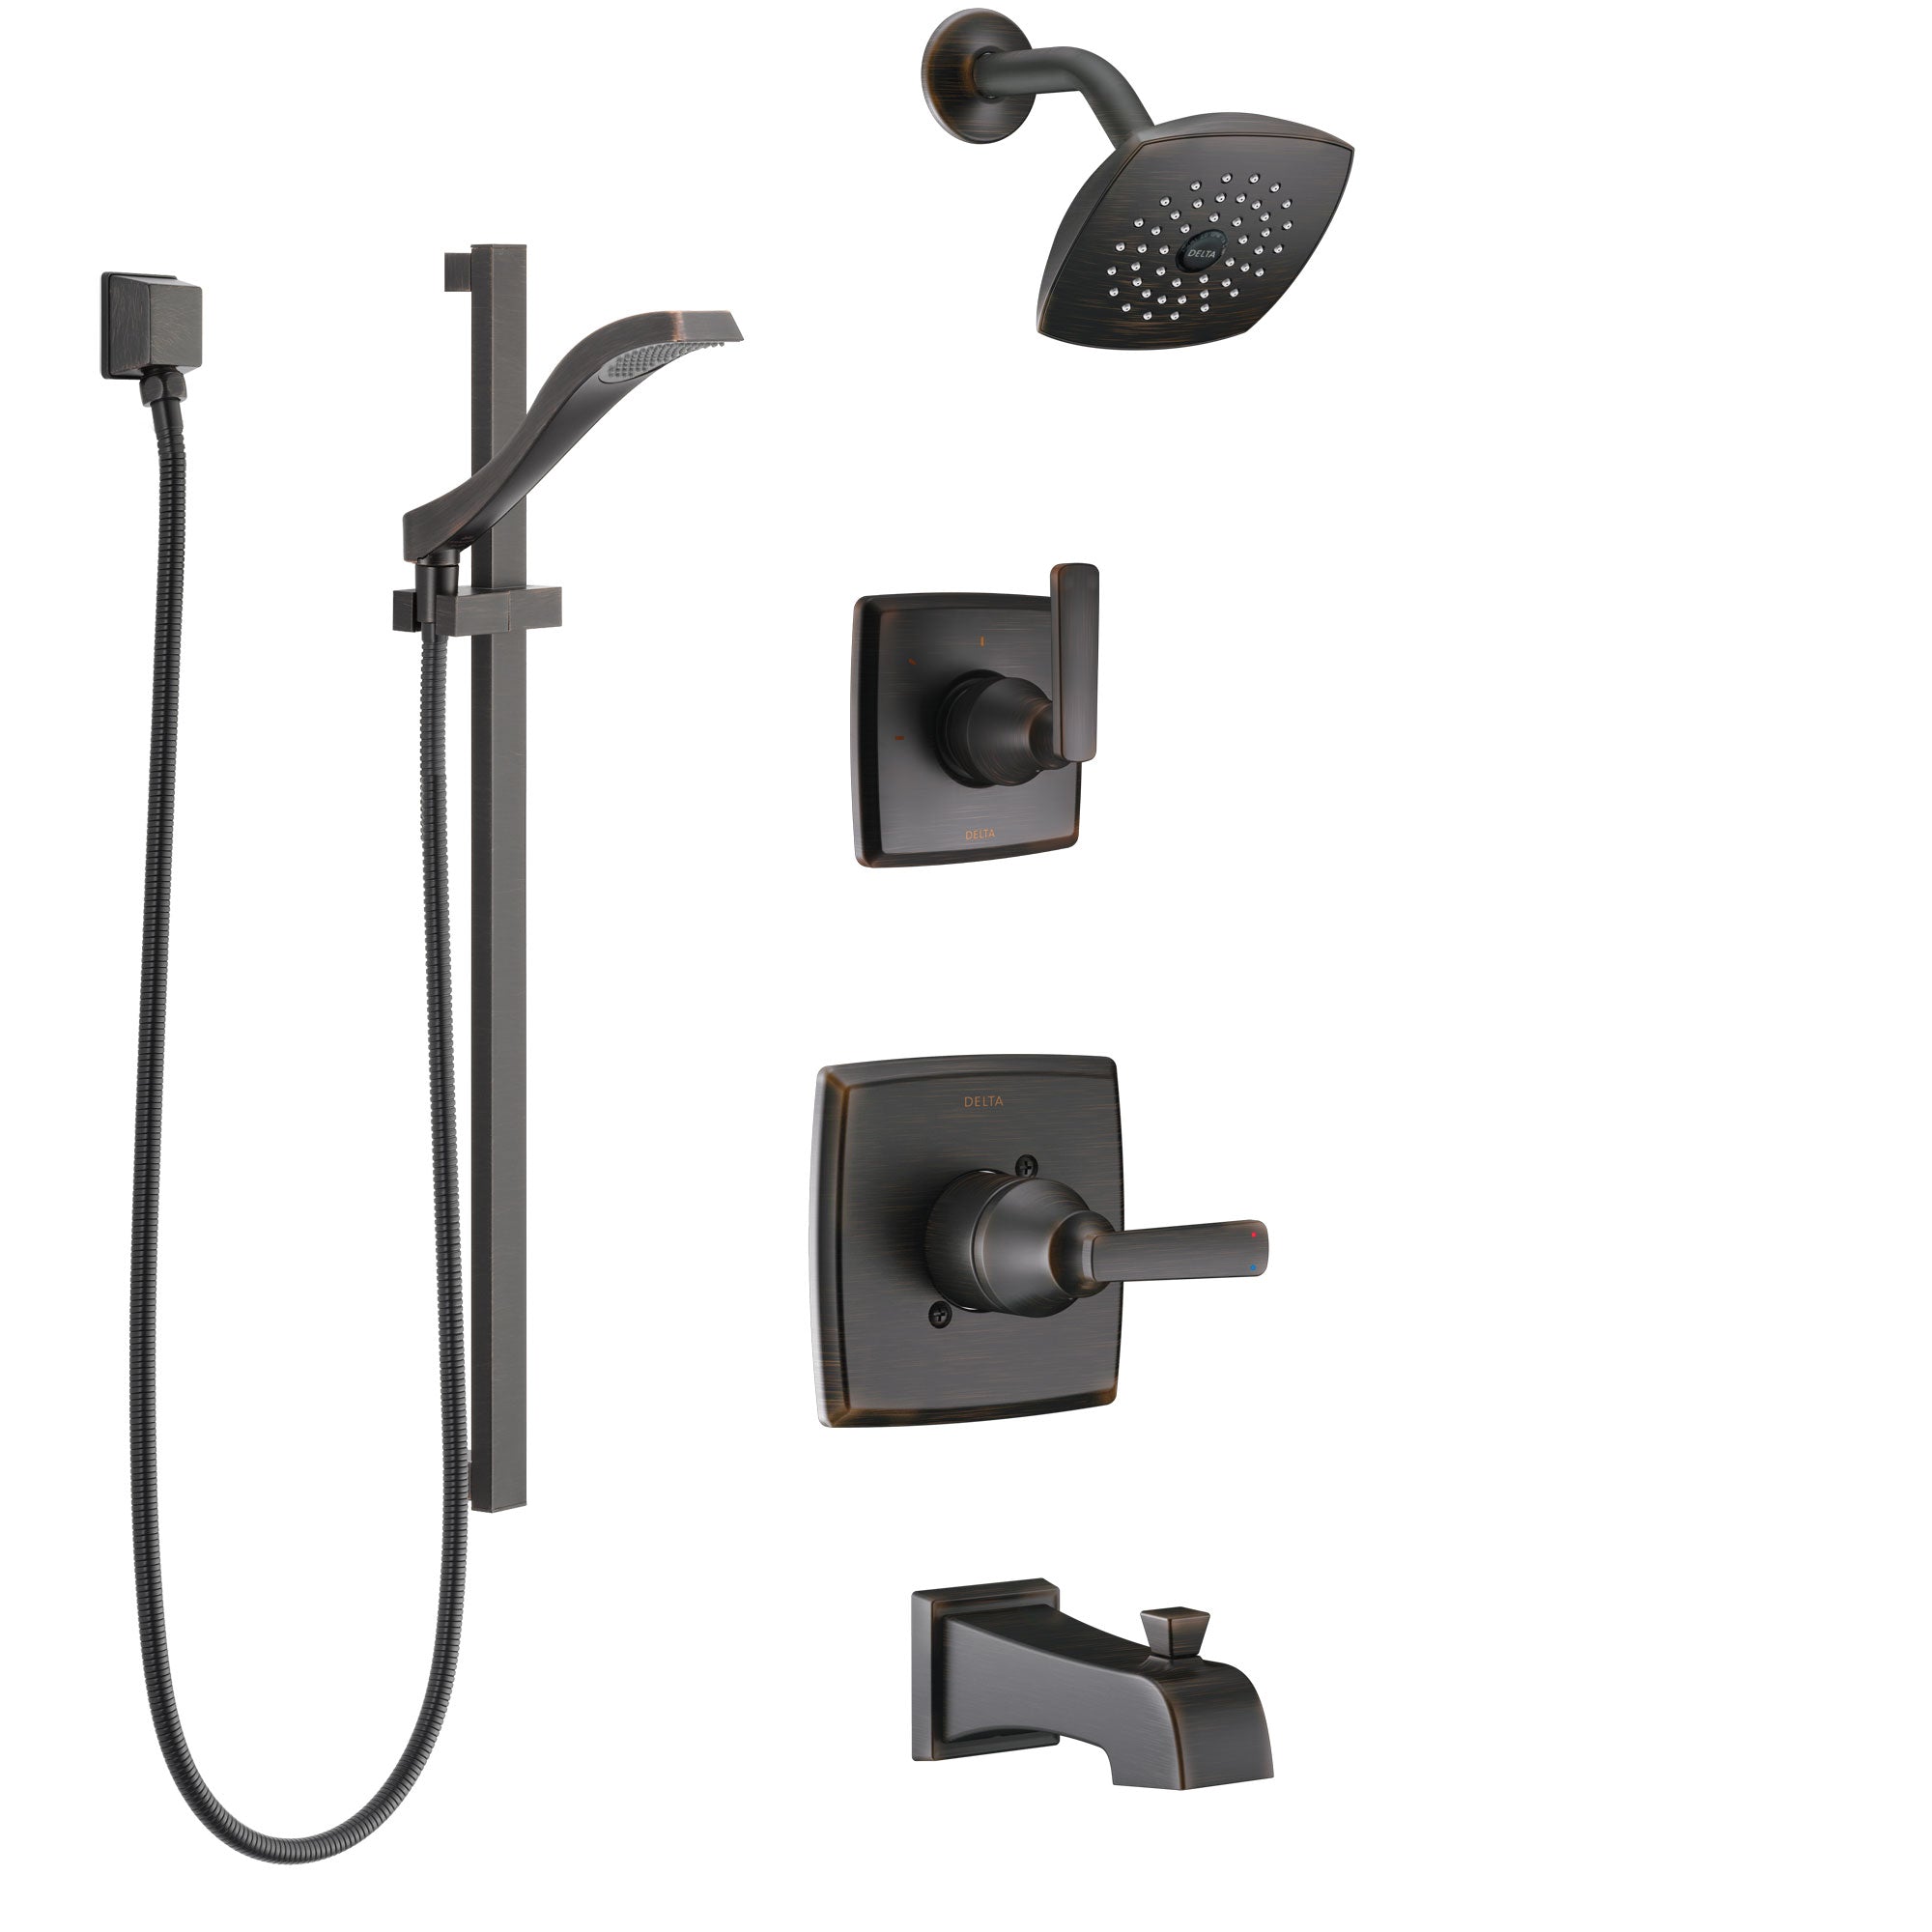 Delta Ashlyn Venetian Bronze Tub and Shower System with Control Handle, 3-Setting Diverter, Showerhead, and Hand Shower with Slidebar SS14464RB5